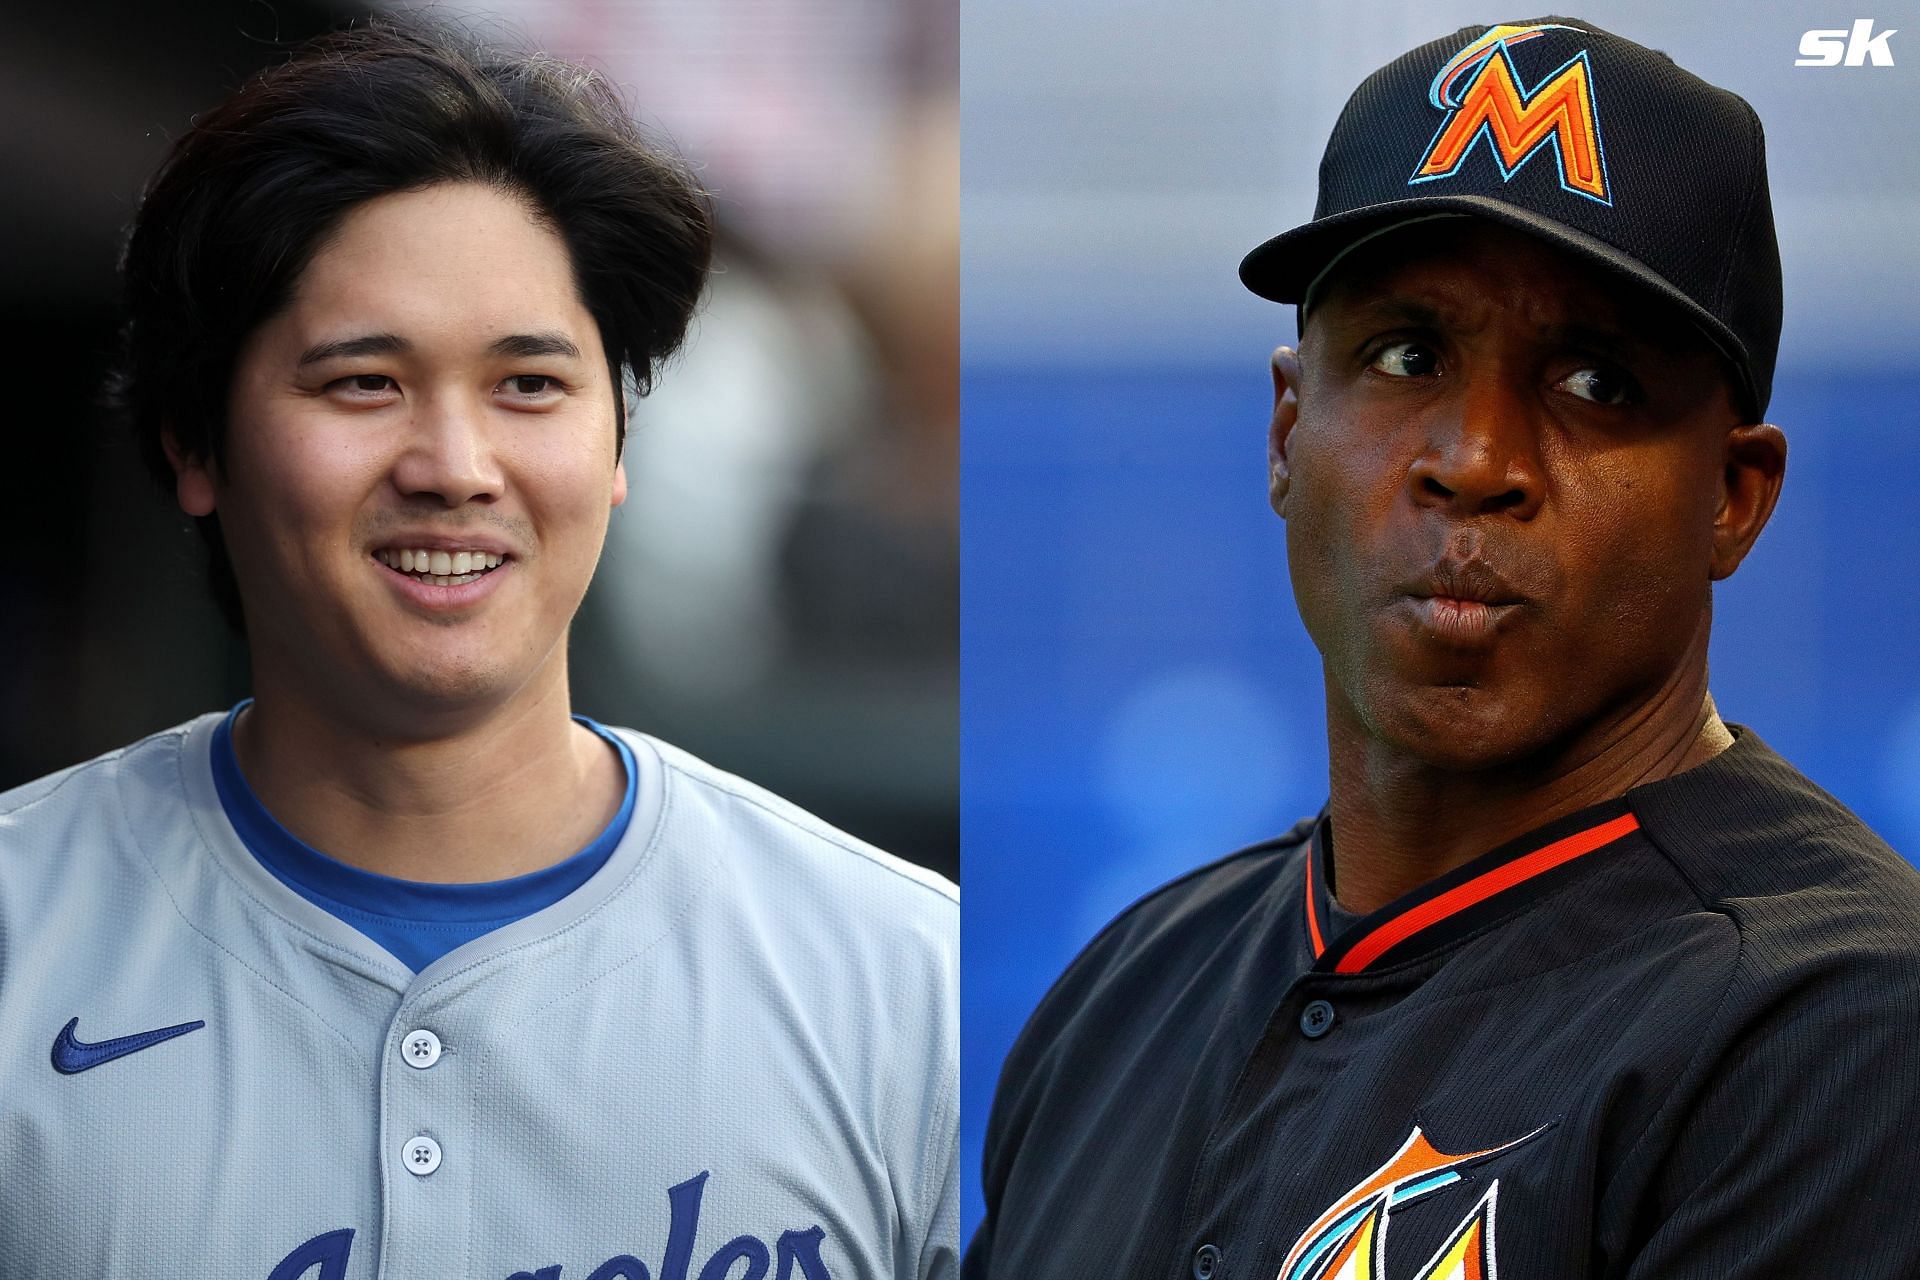 Shohei Ohtani is being comapared to Barry Bonds